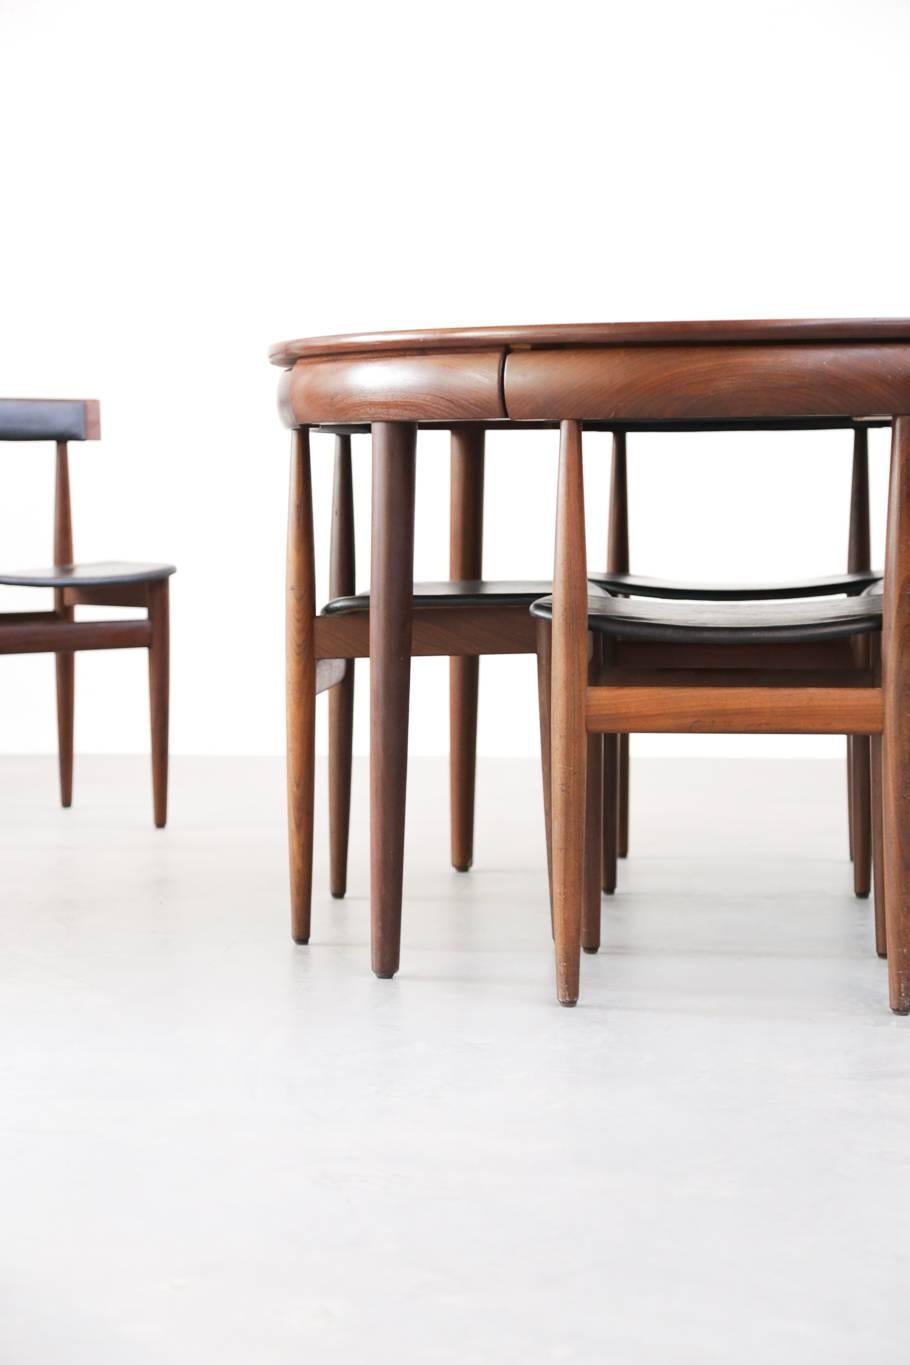 Mid-20th Century Set of Danish Dining Table with Six Chairs Hans Olsen Model Roundette